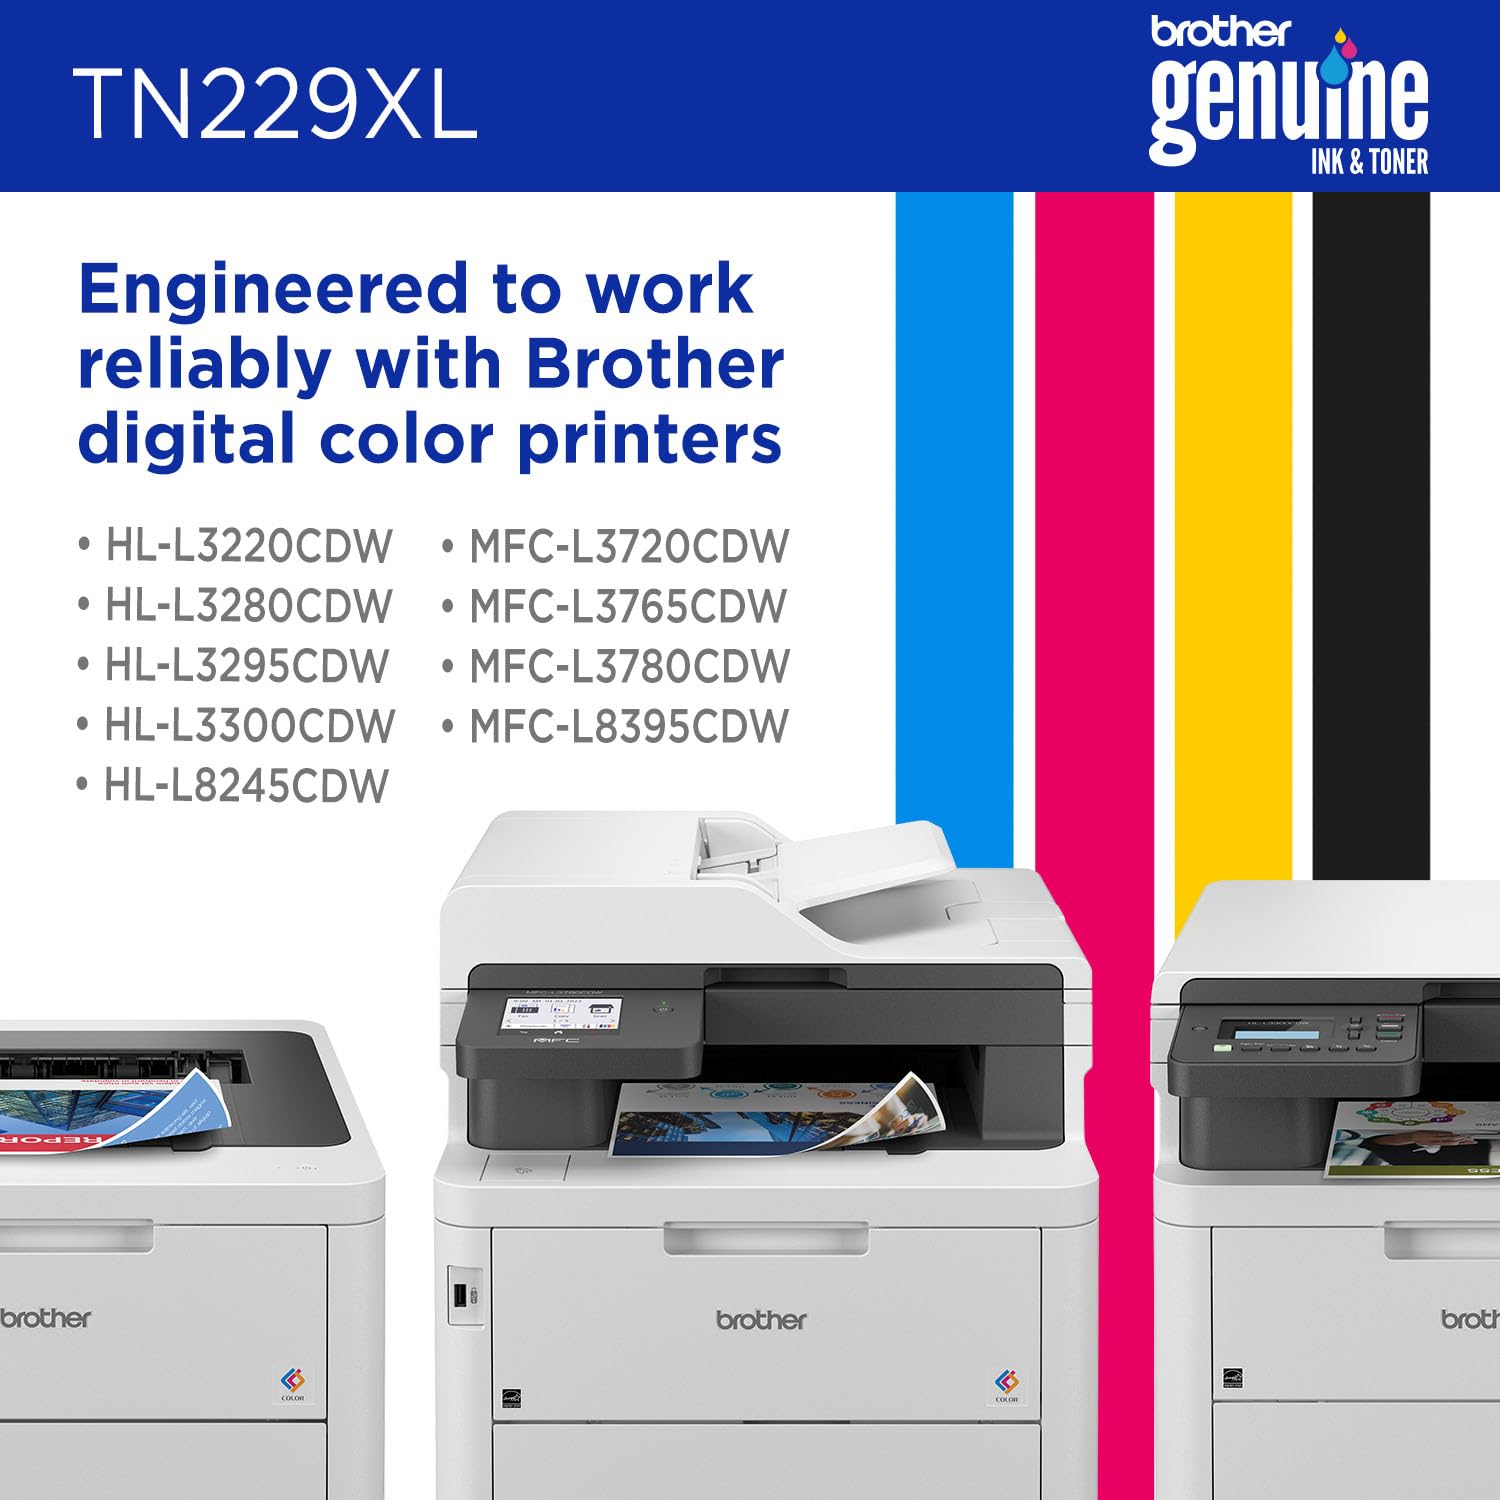 Brother Genuine TN229XLC Cyan High Yield Printer Toner Cartridge - Print up to 2,300 Pages(1)